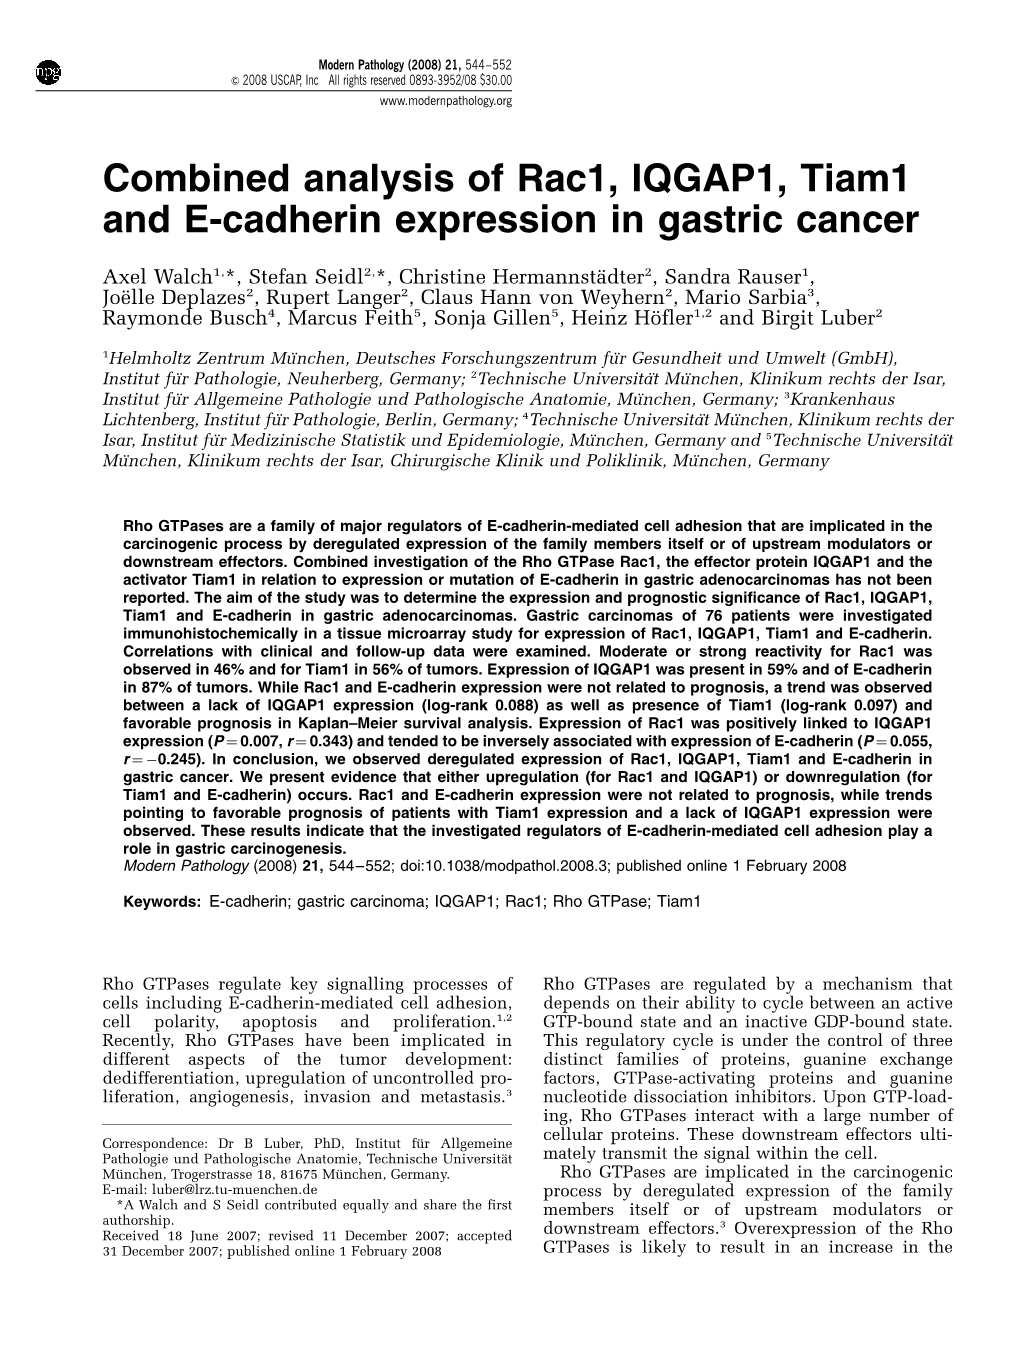 Combined Analysis of Rac1, IQGAP1, Tiam1 and E-Cadherin Expression in Gastric Cancer